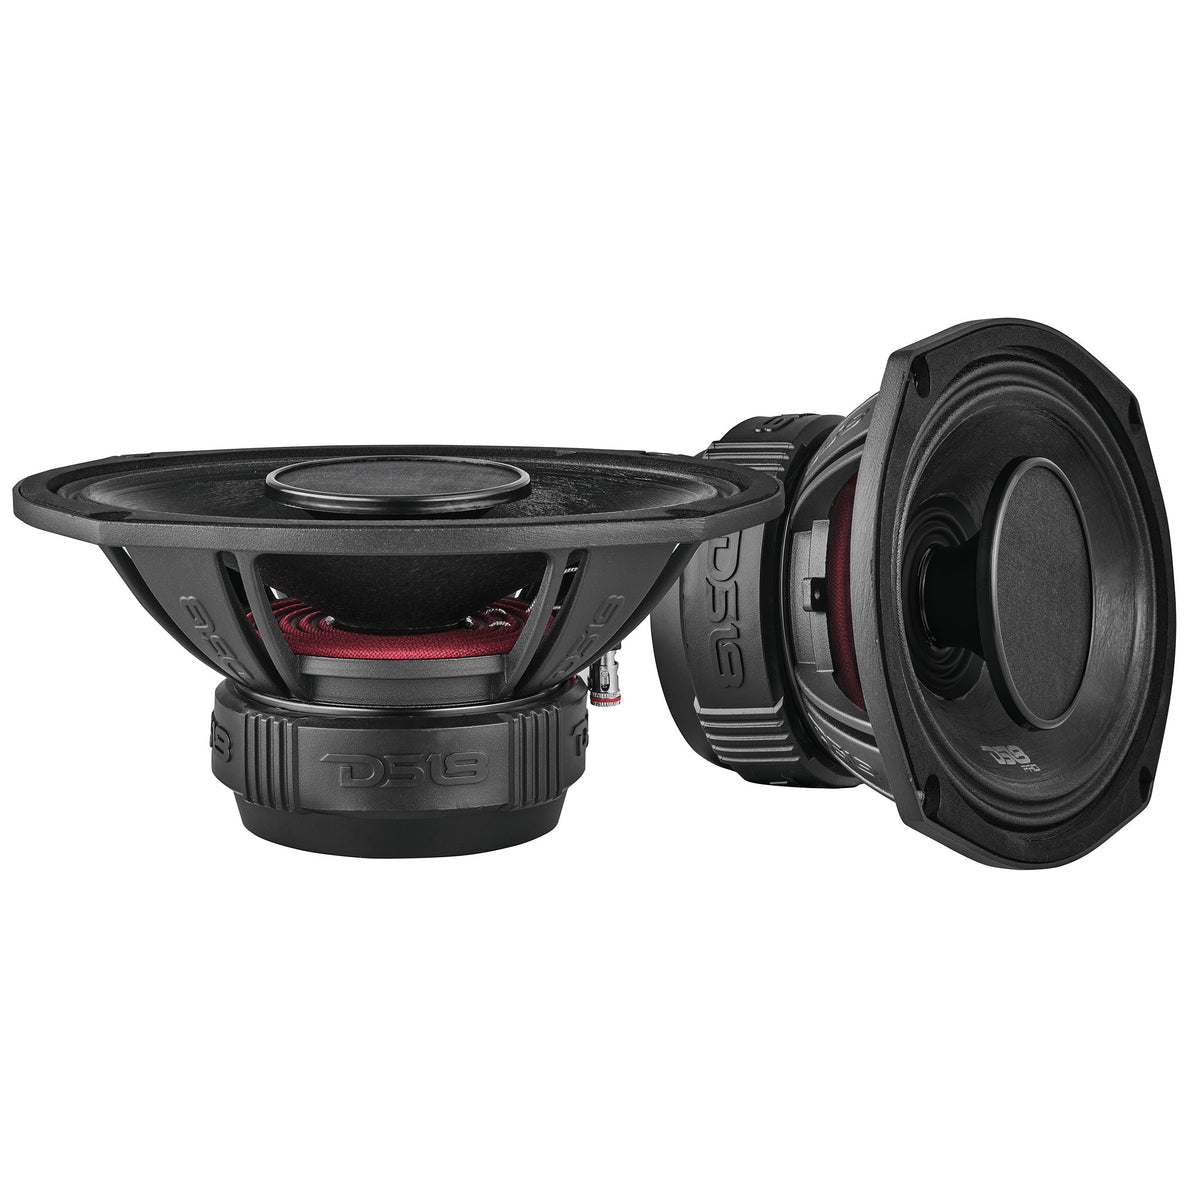 PRO 6x9" Water Resistant Hybrid Mid-Range Loudspeaker with Built-in Driver 250 Watts Rms 4-Ohm